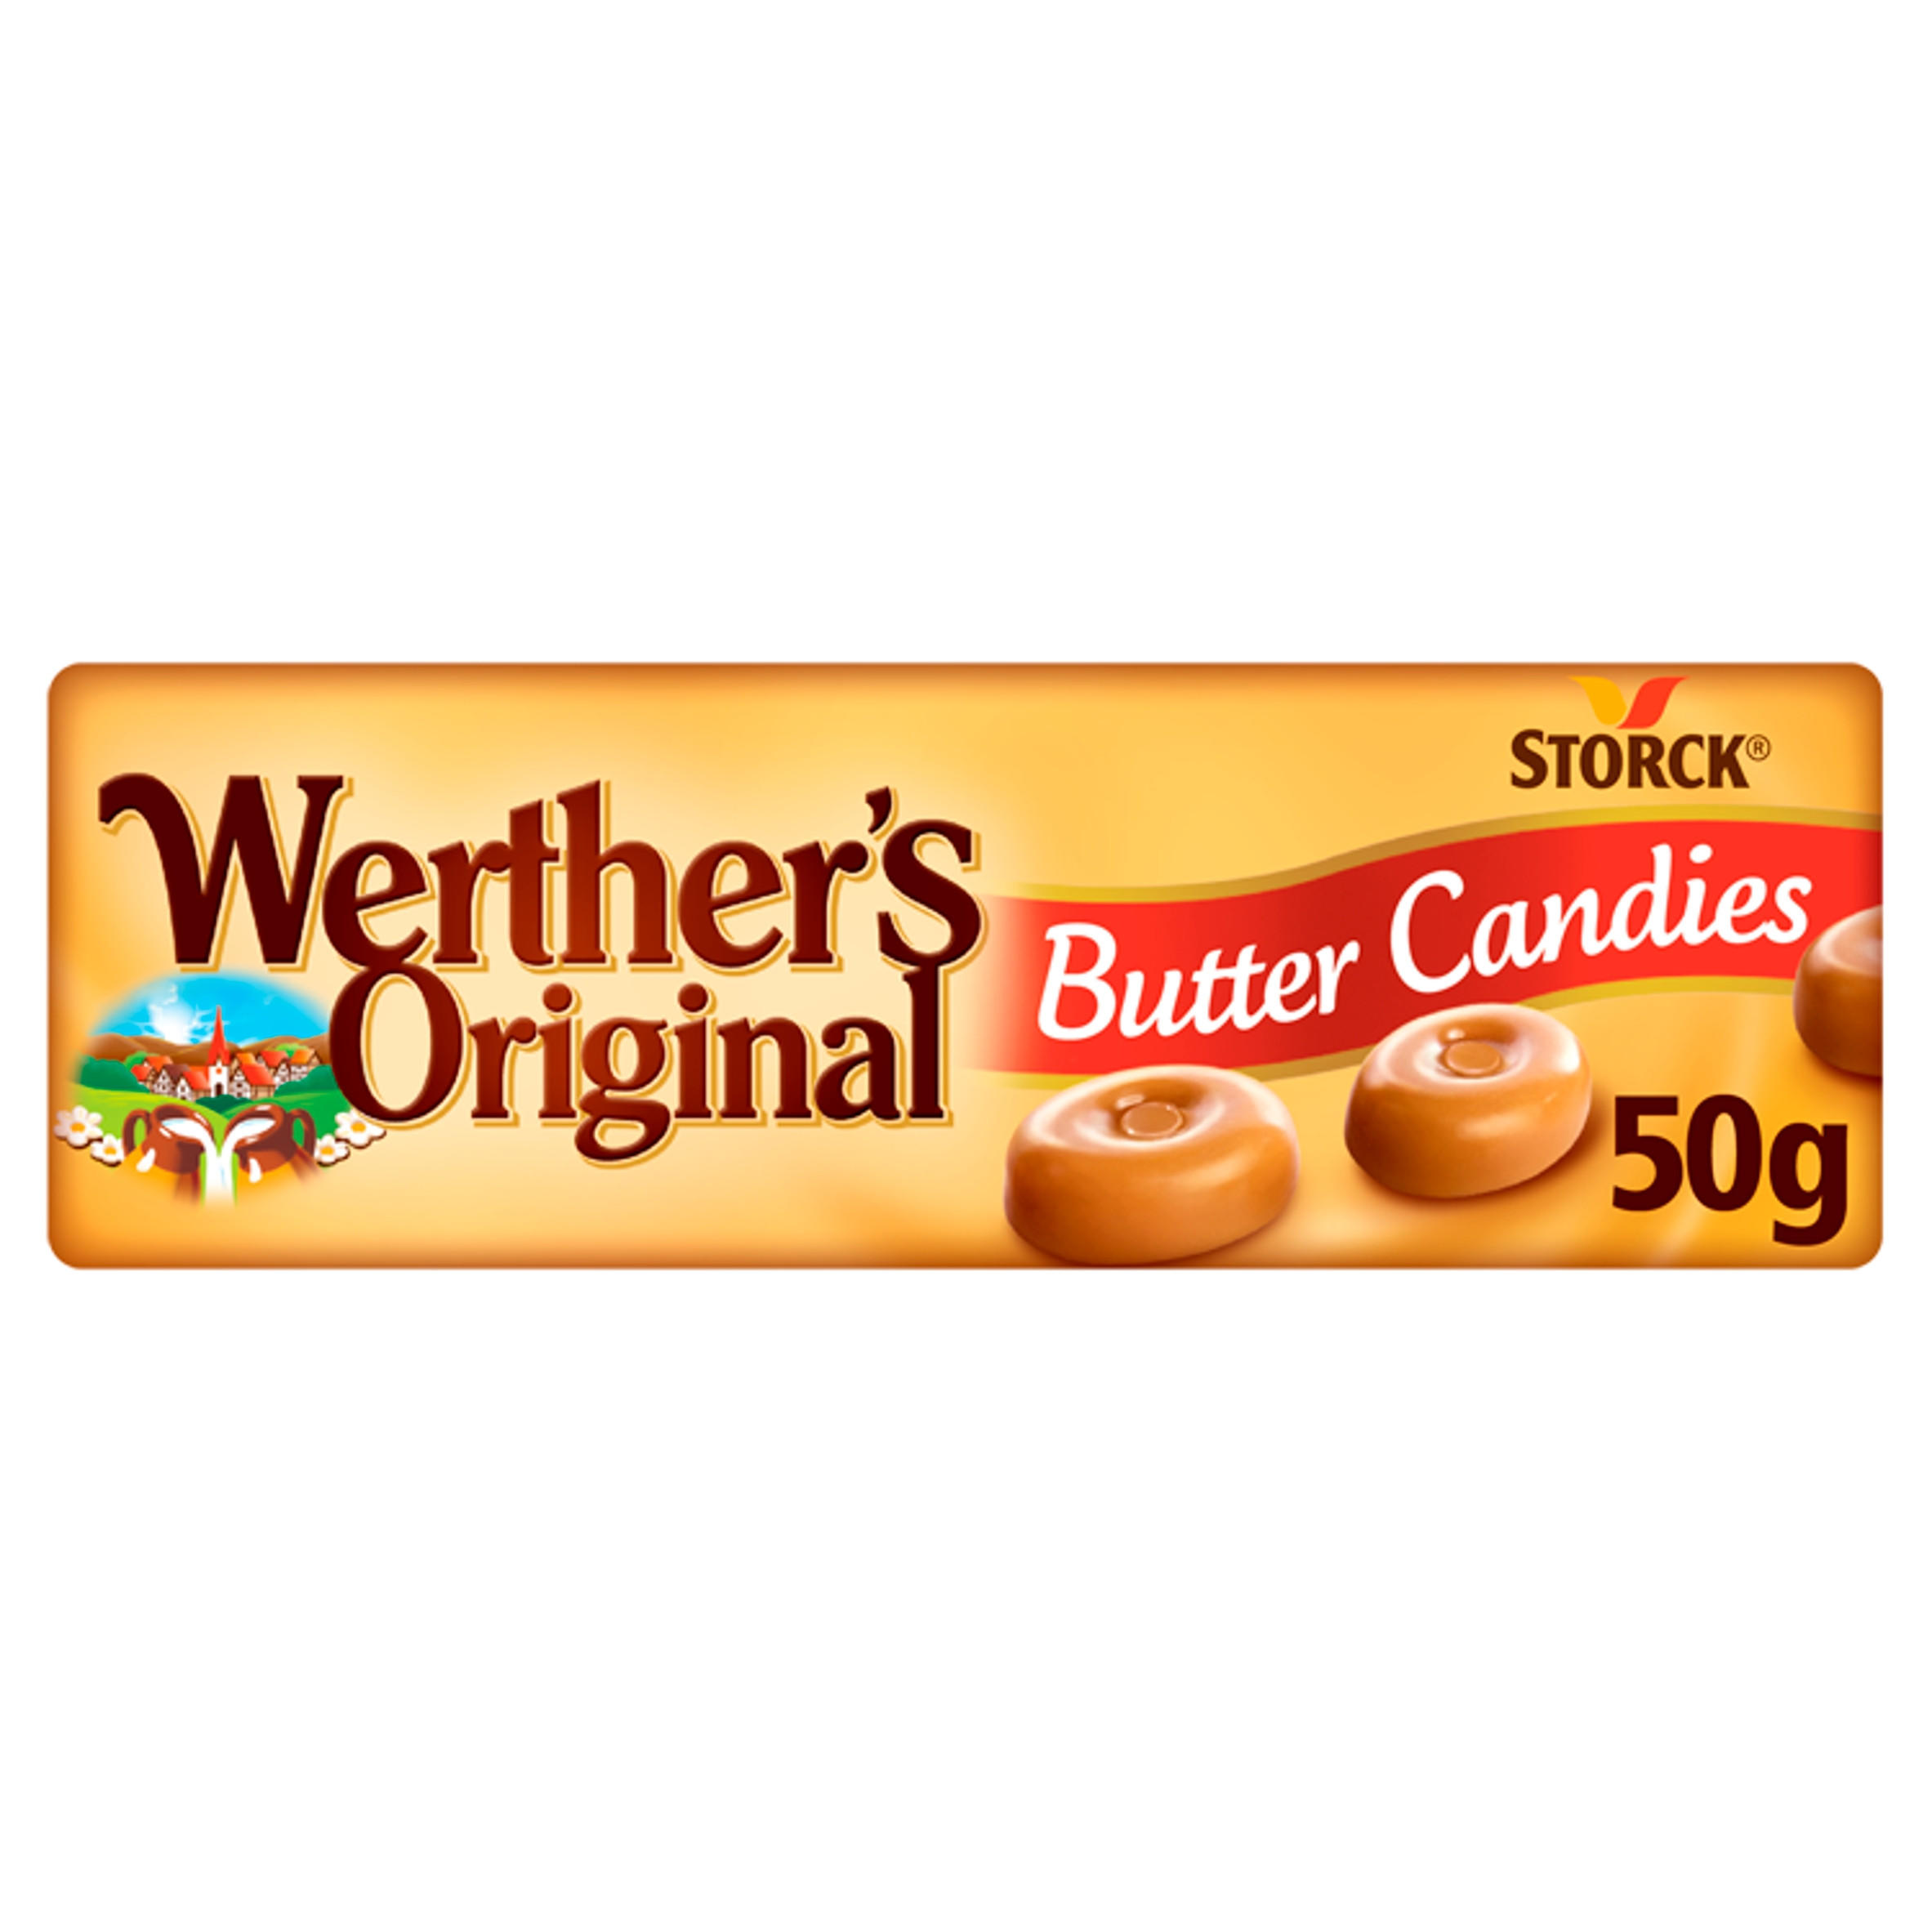 Werthers Original Butter Candies 50g Sweets Iceland Foods